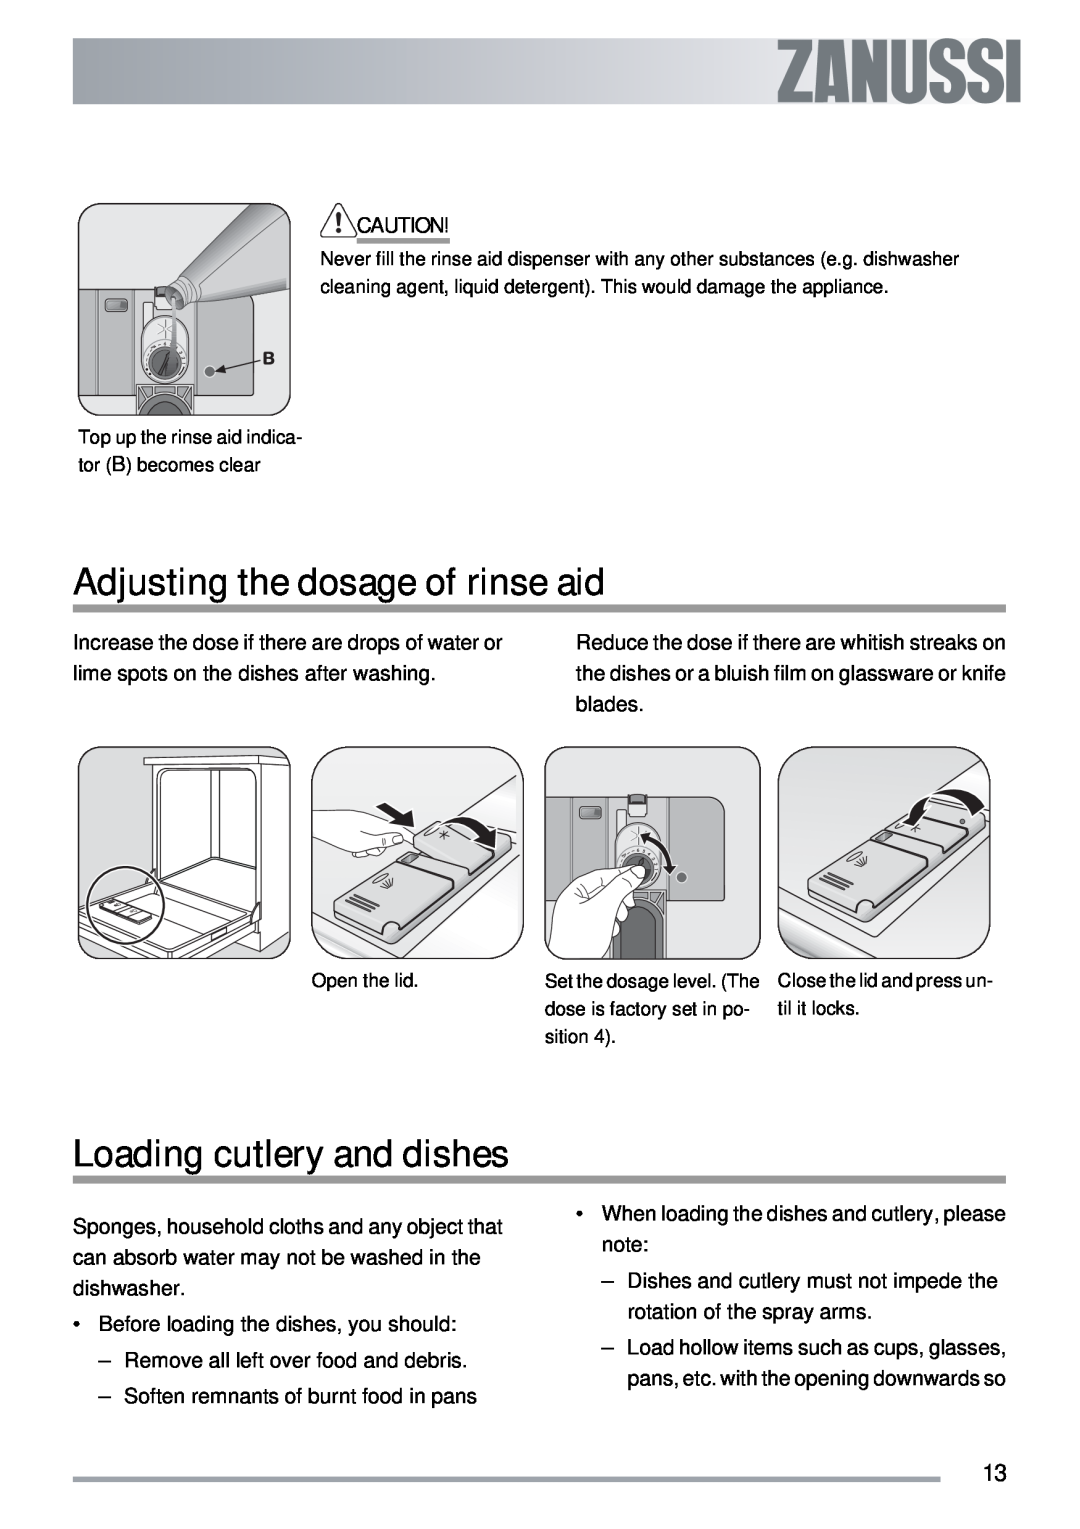 Zanussi ZDT 311 user manual Adjusting the dosage of rinse aid, Loading cutlery and dishes 